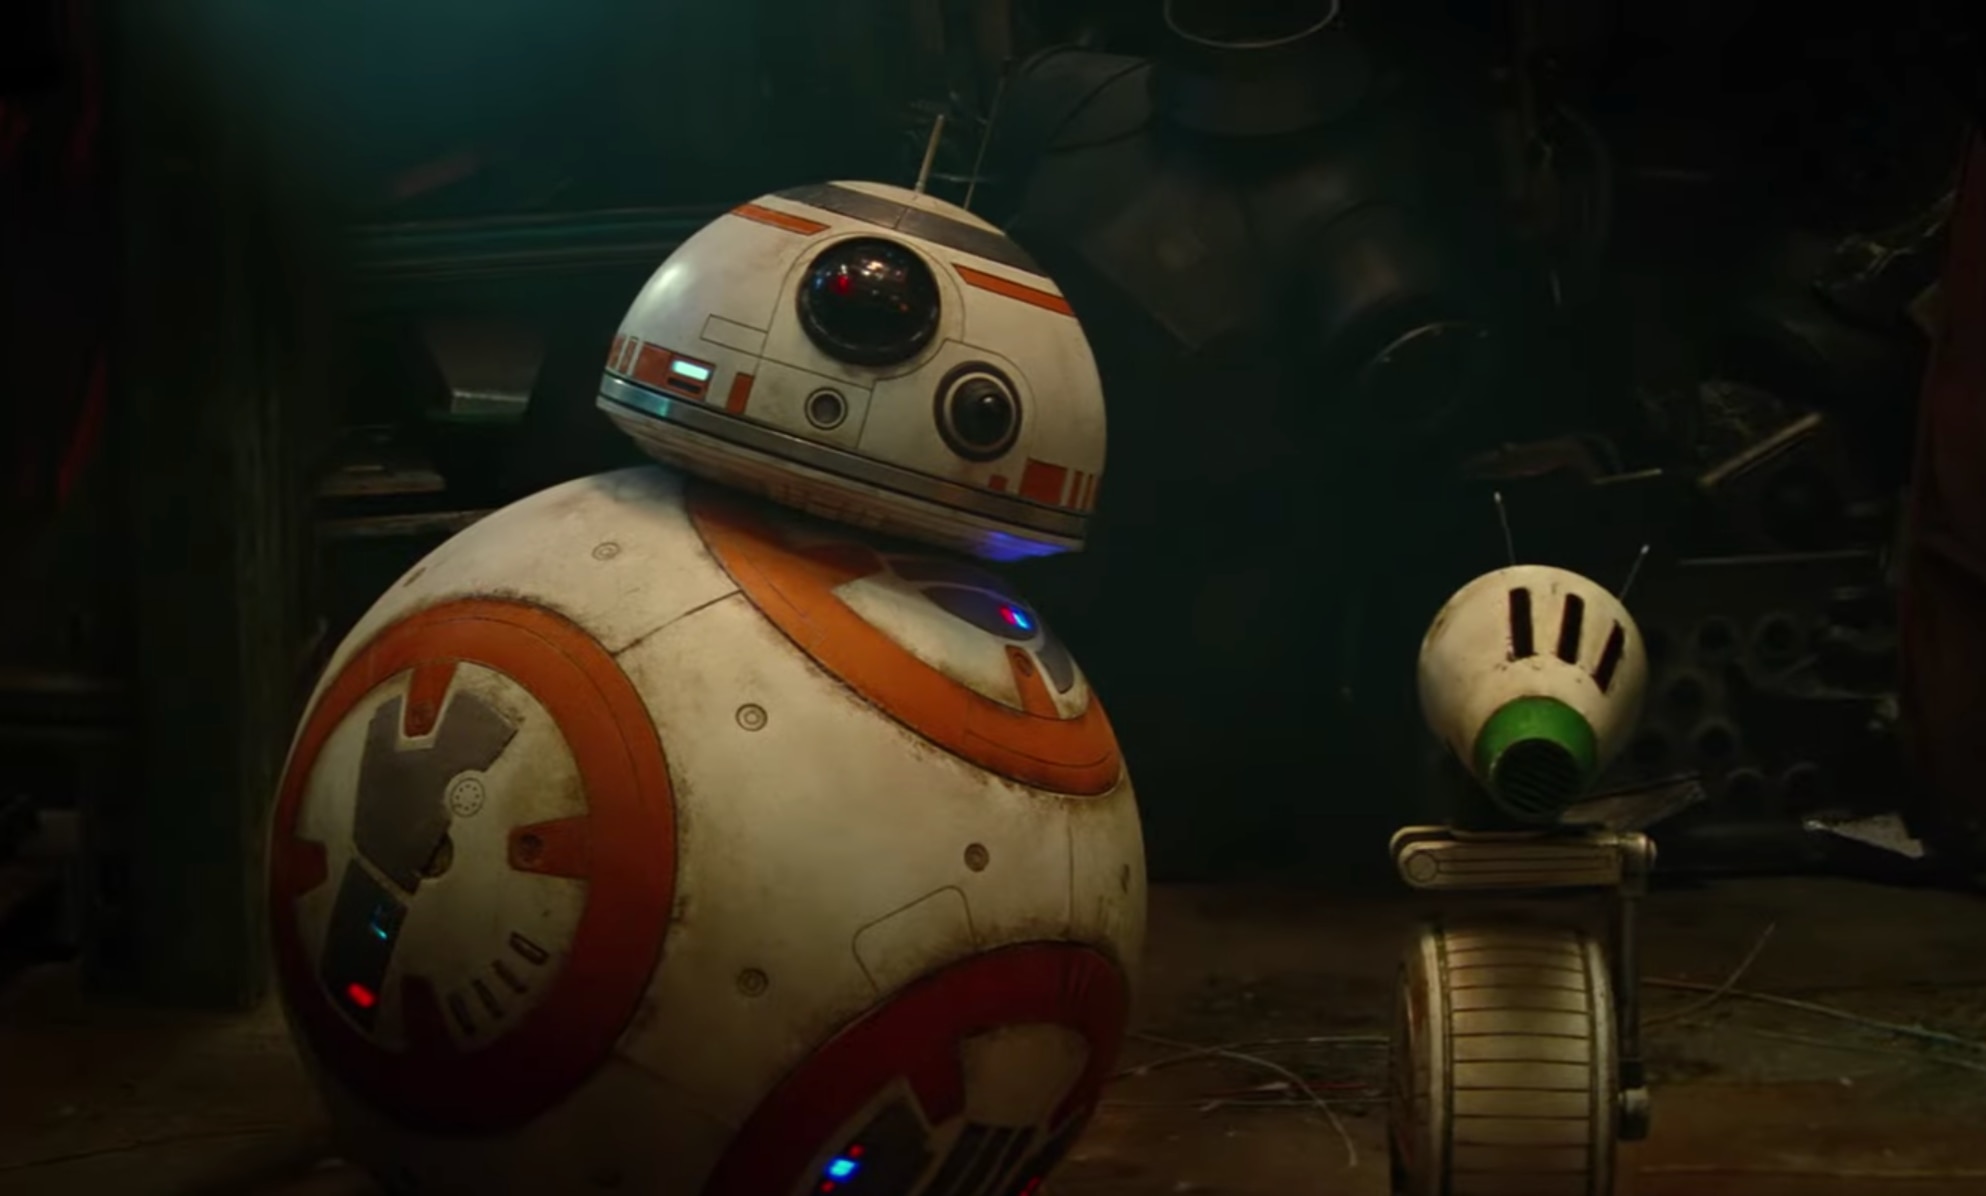 Star Wars: The Rise of Skywalker (BB-8 and D-O)